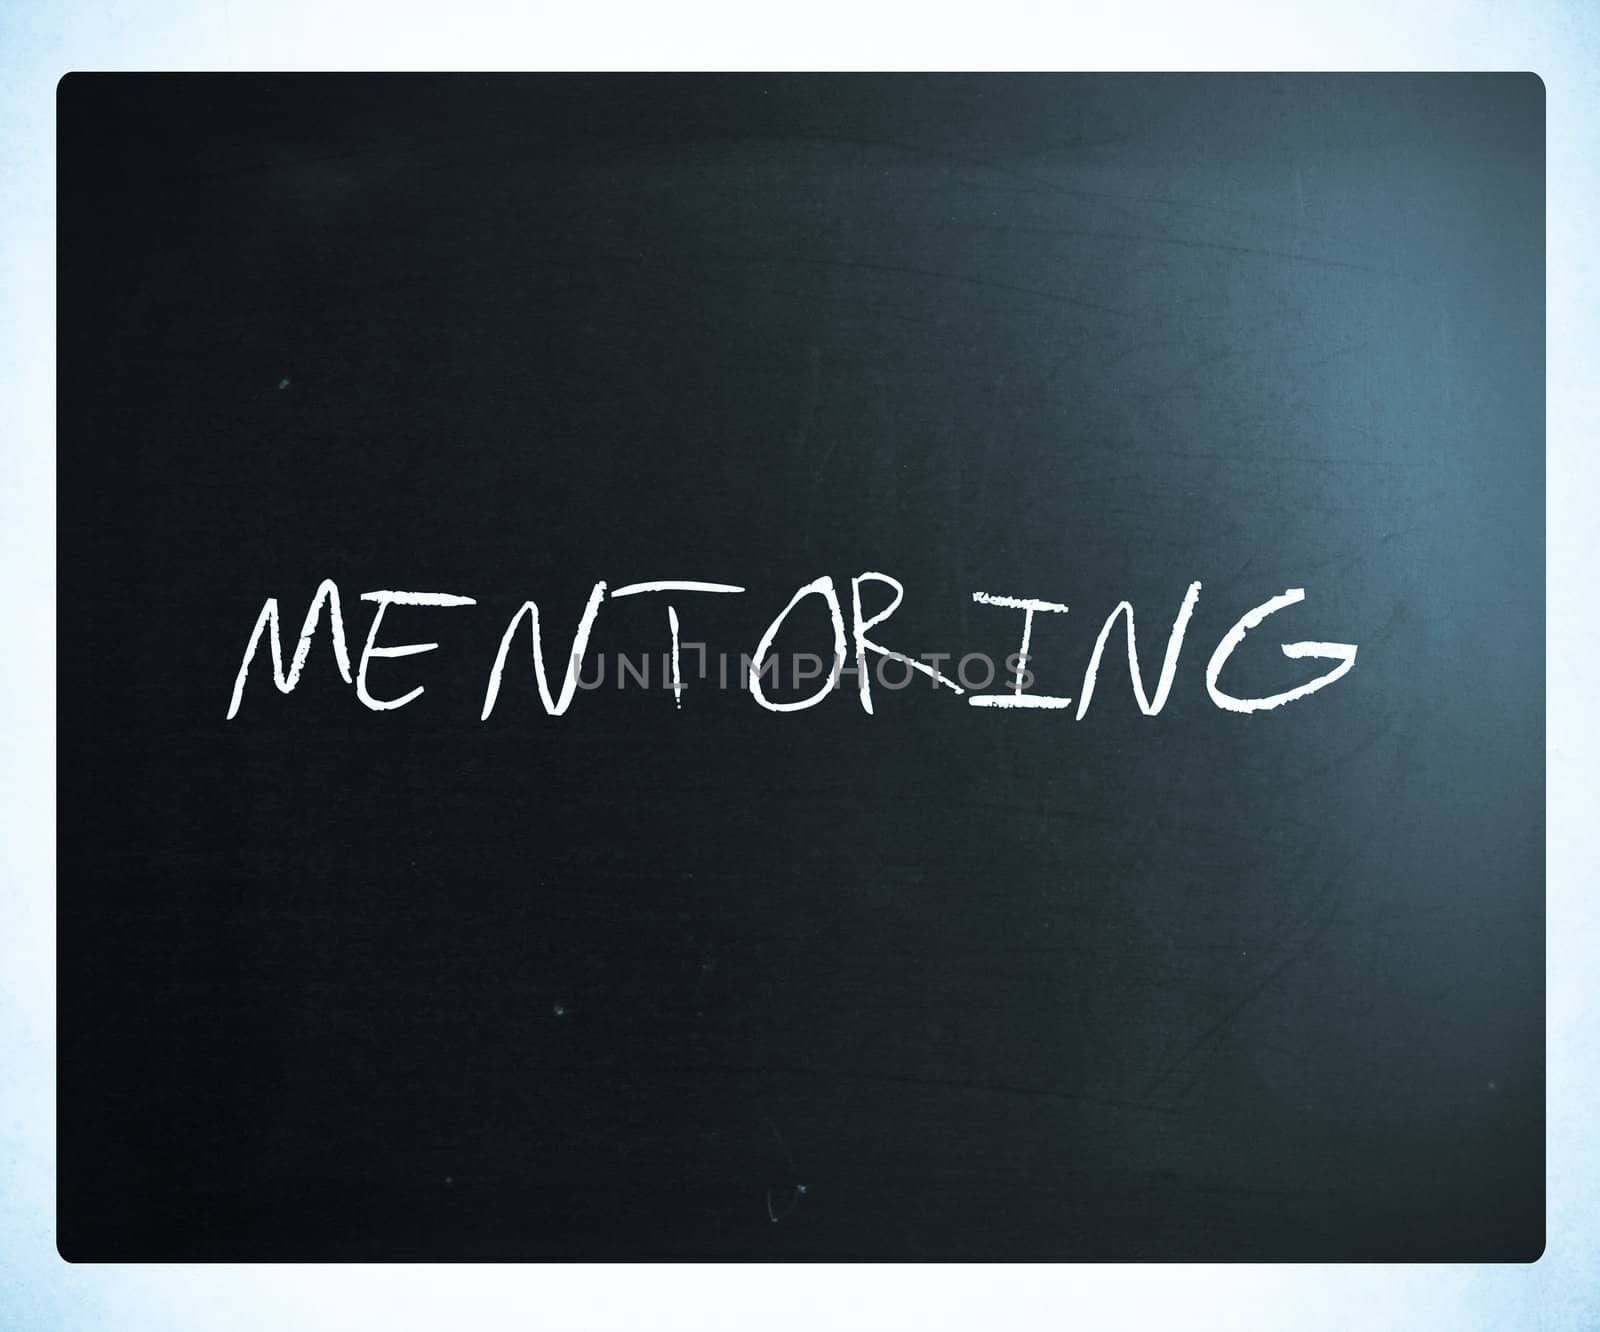 The word "Mentoring" handwritten with white chalk on a blackboard.